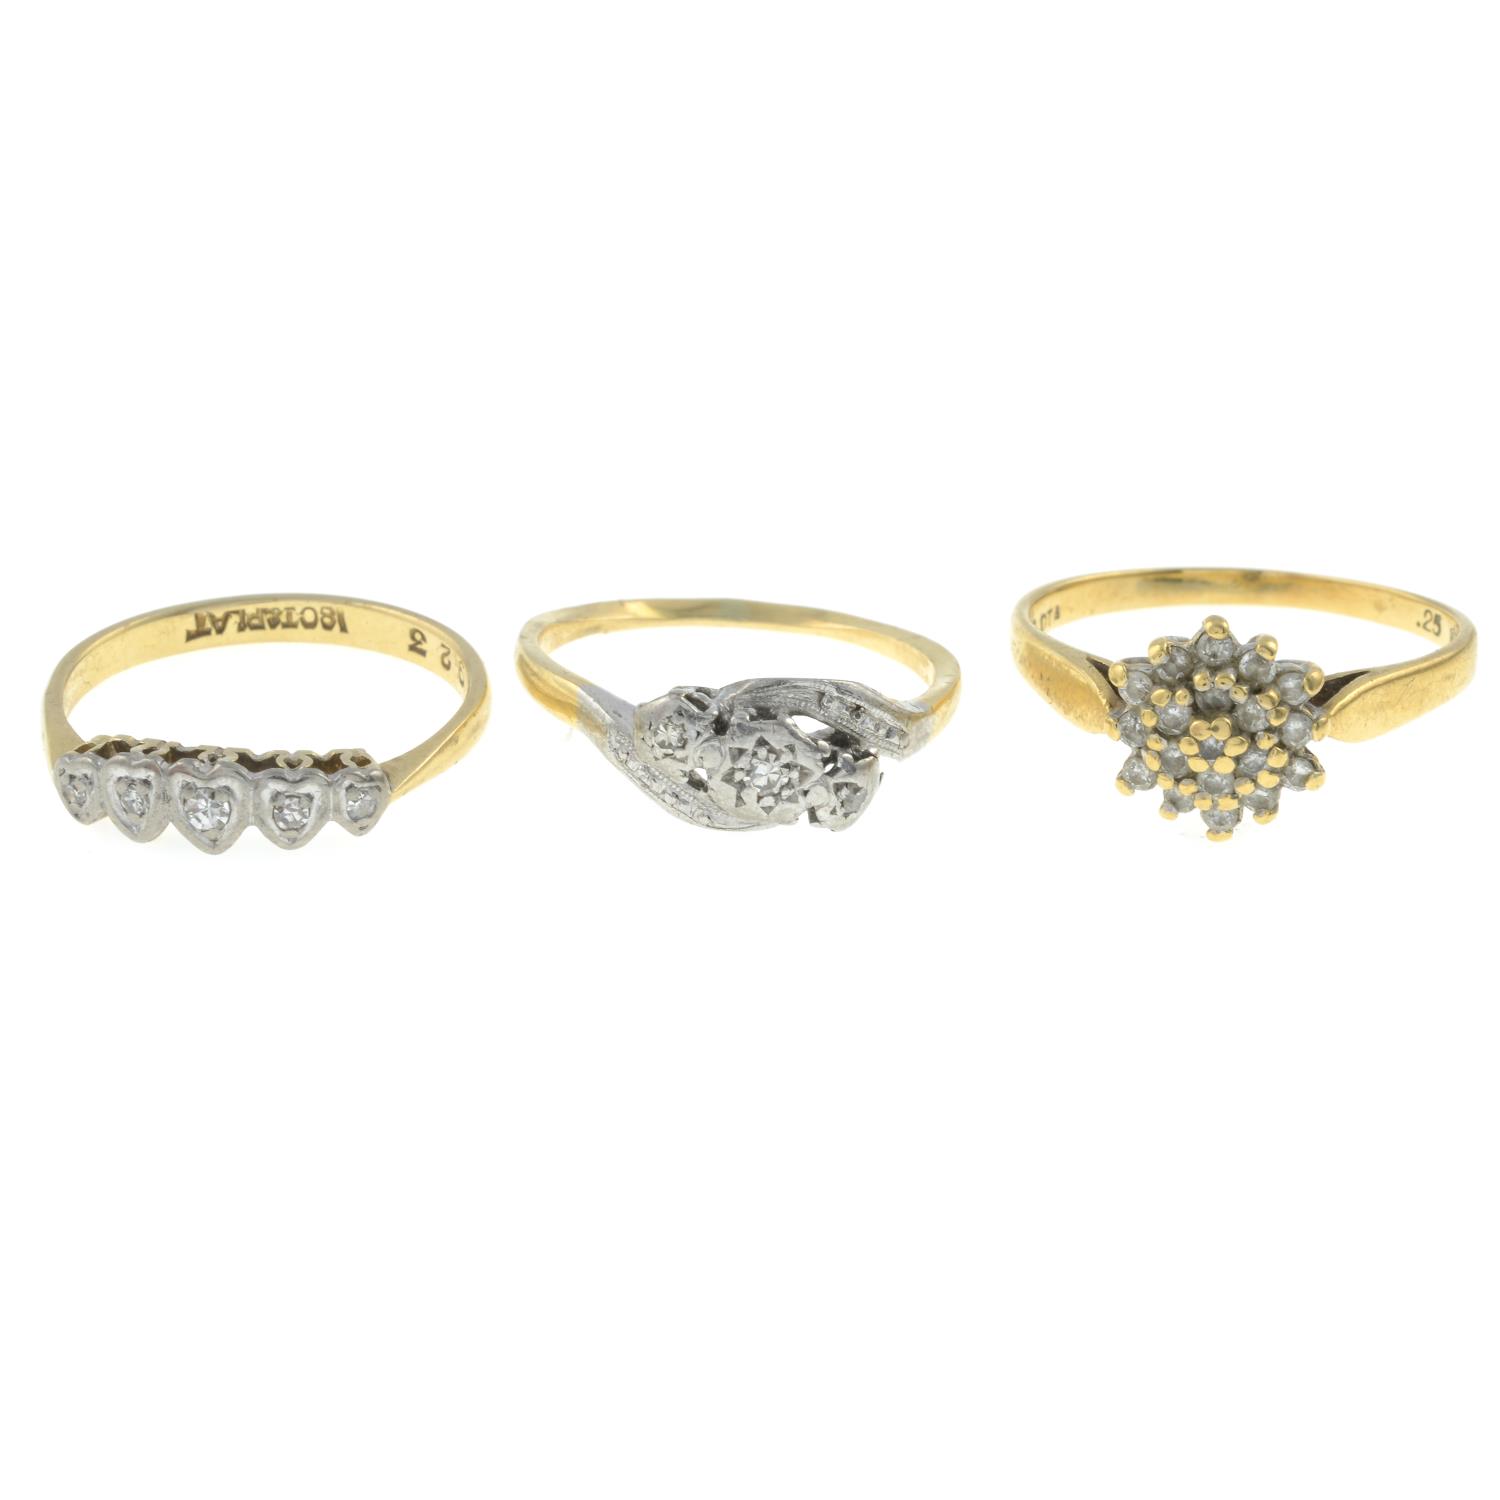 18ct gold diamond cluster ring,